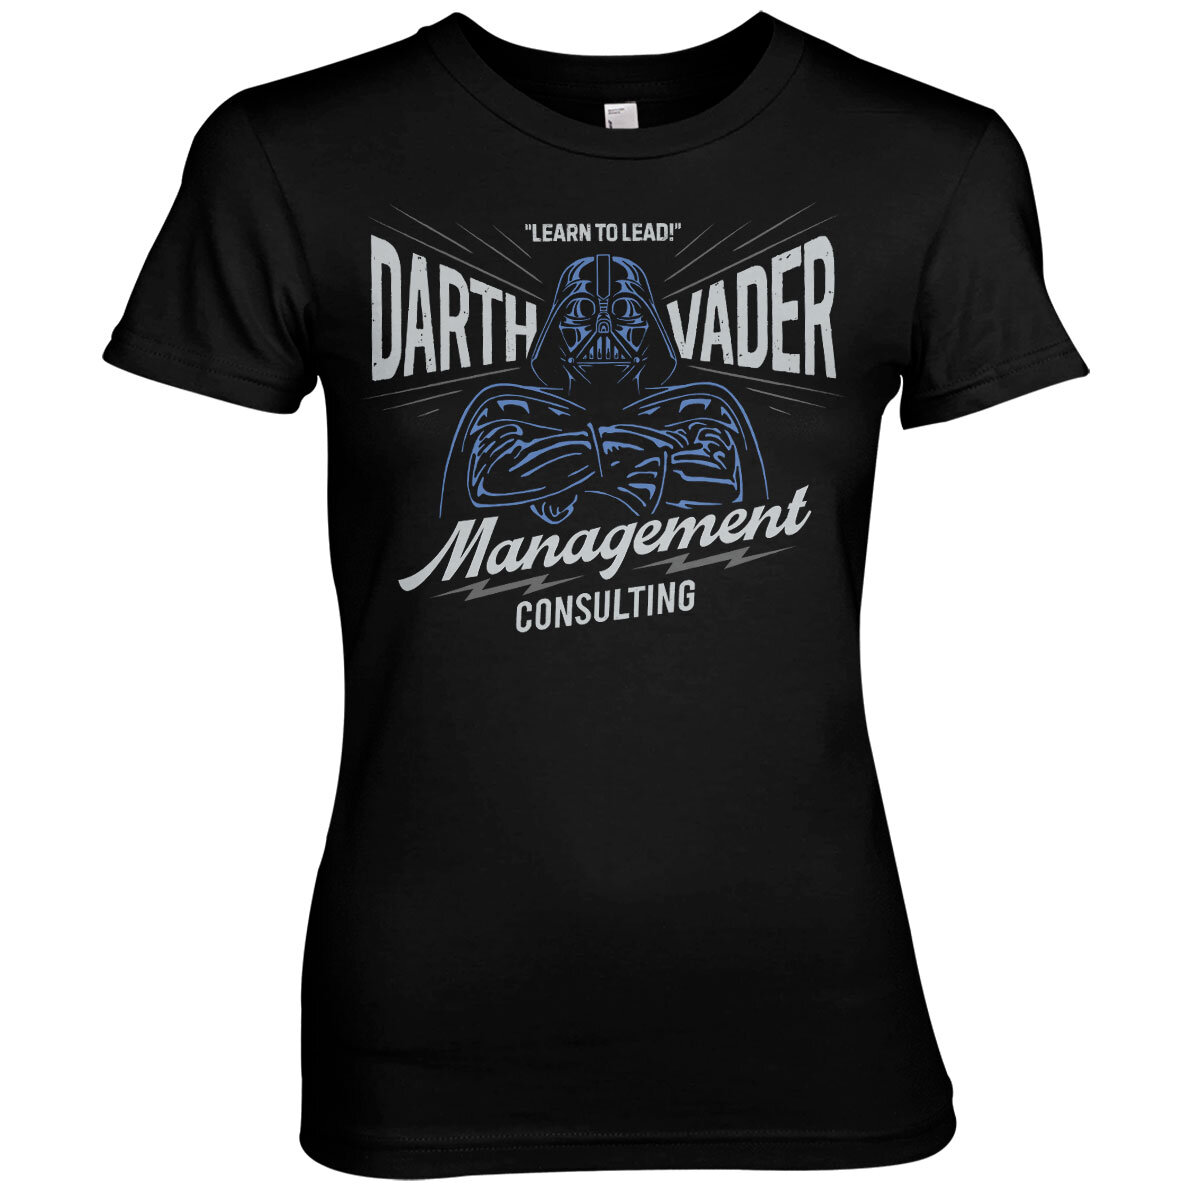 Darth Vader Management Consulting Girly Tee